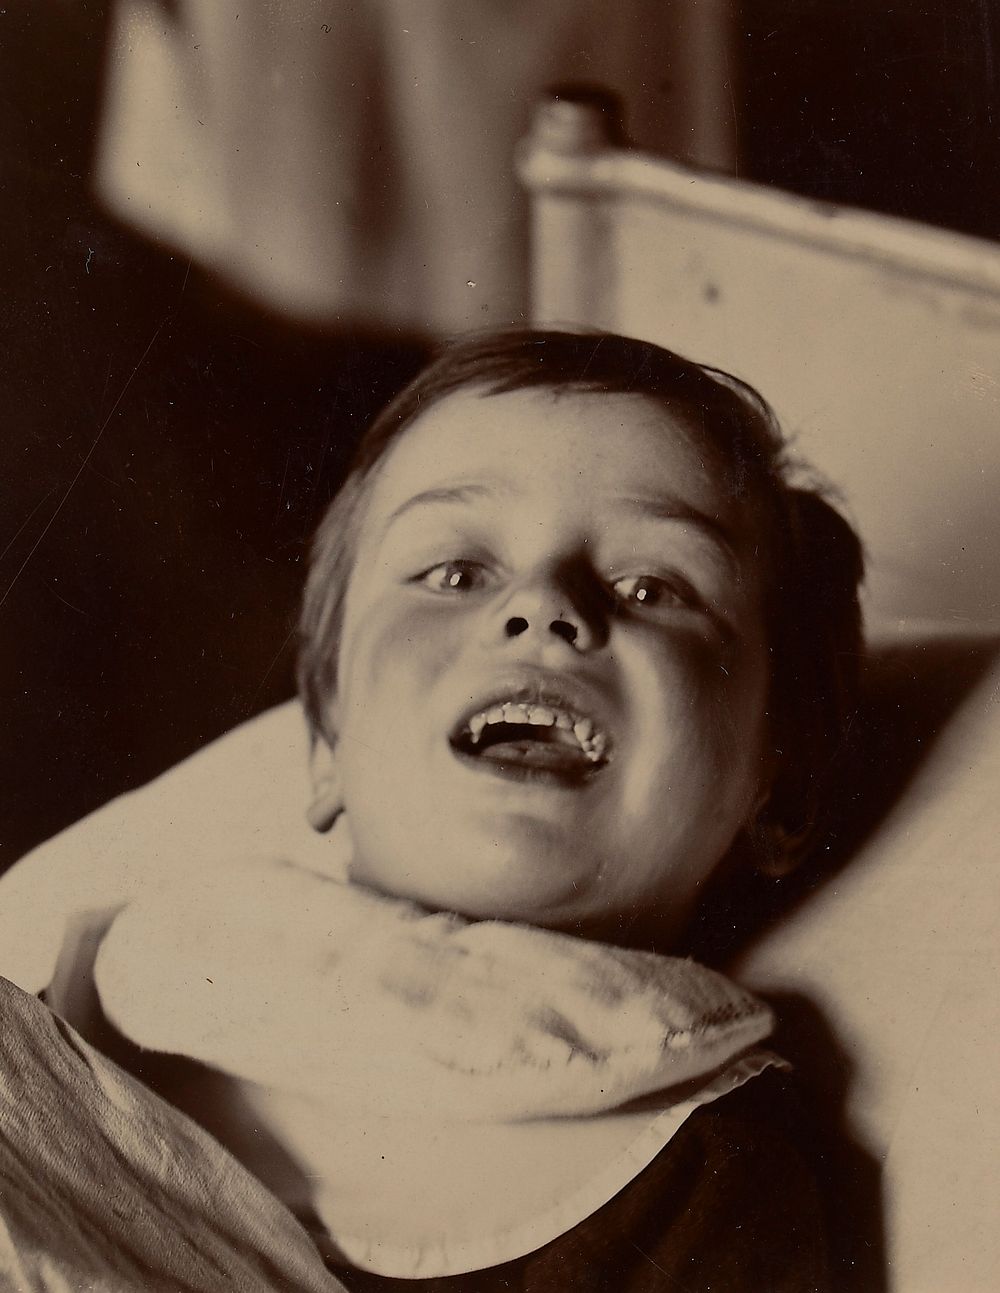 Child possibly suffering from diphtheritic paralysis of the lips and tongue